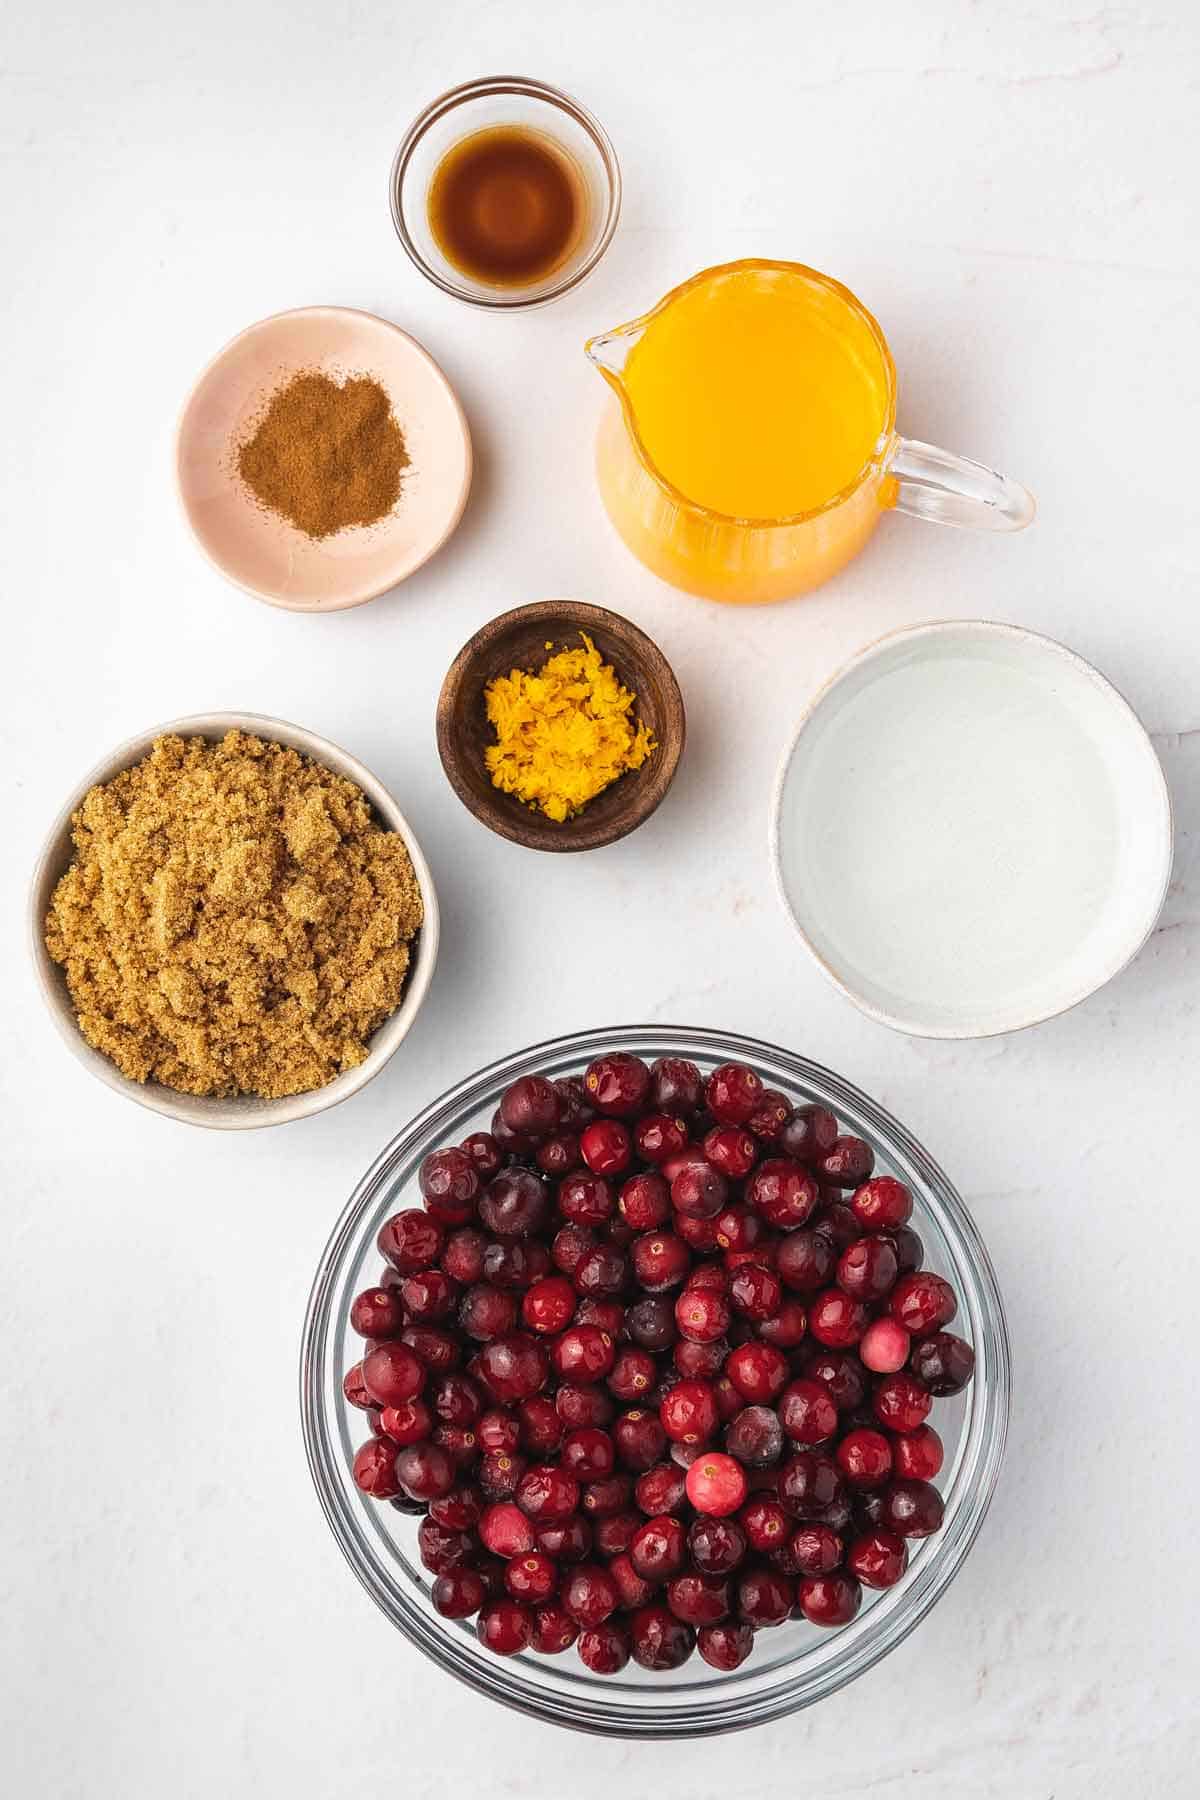 Ingredients needed to make slow cooker cranberry sauce.